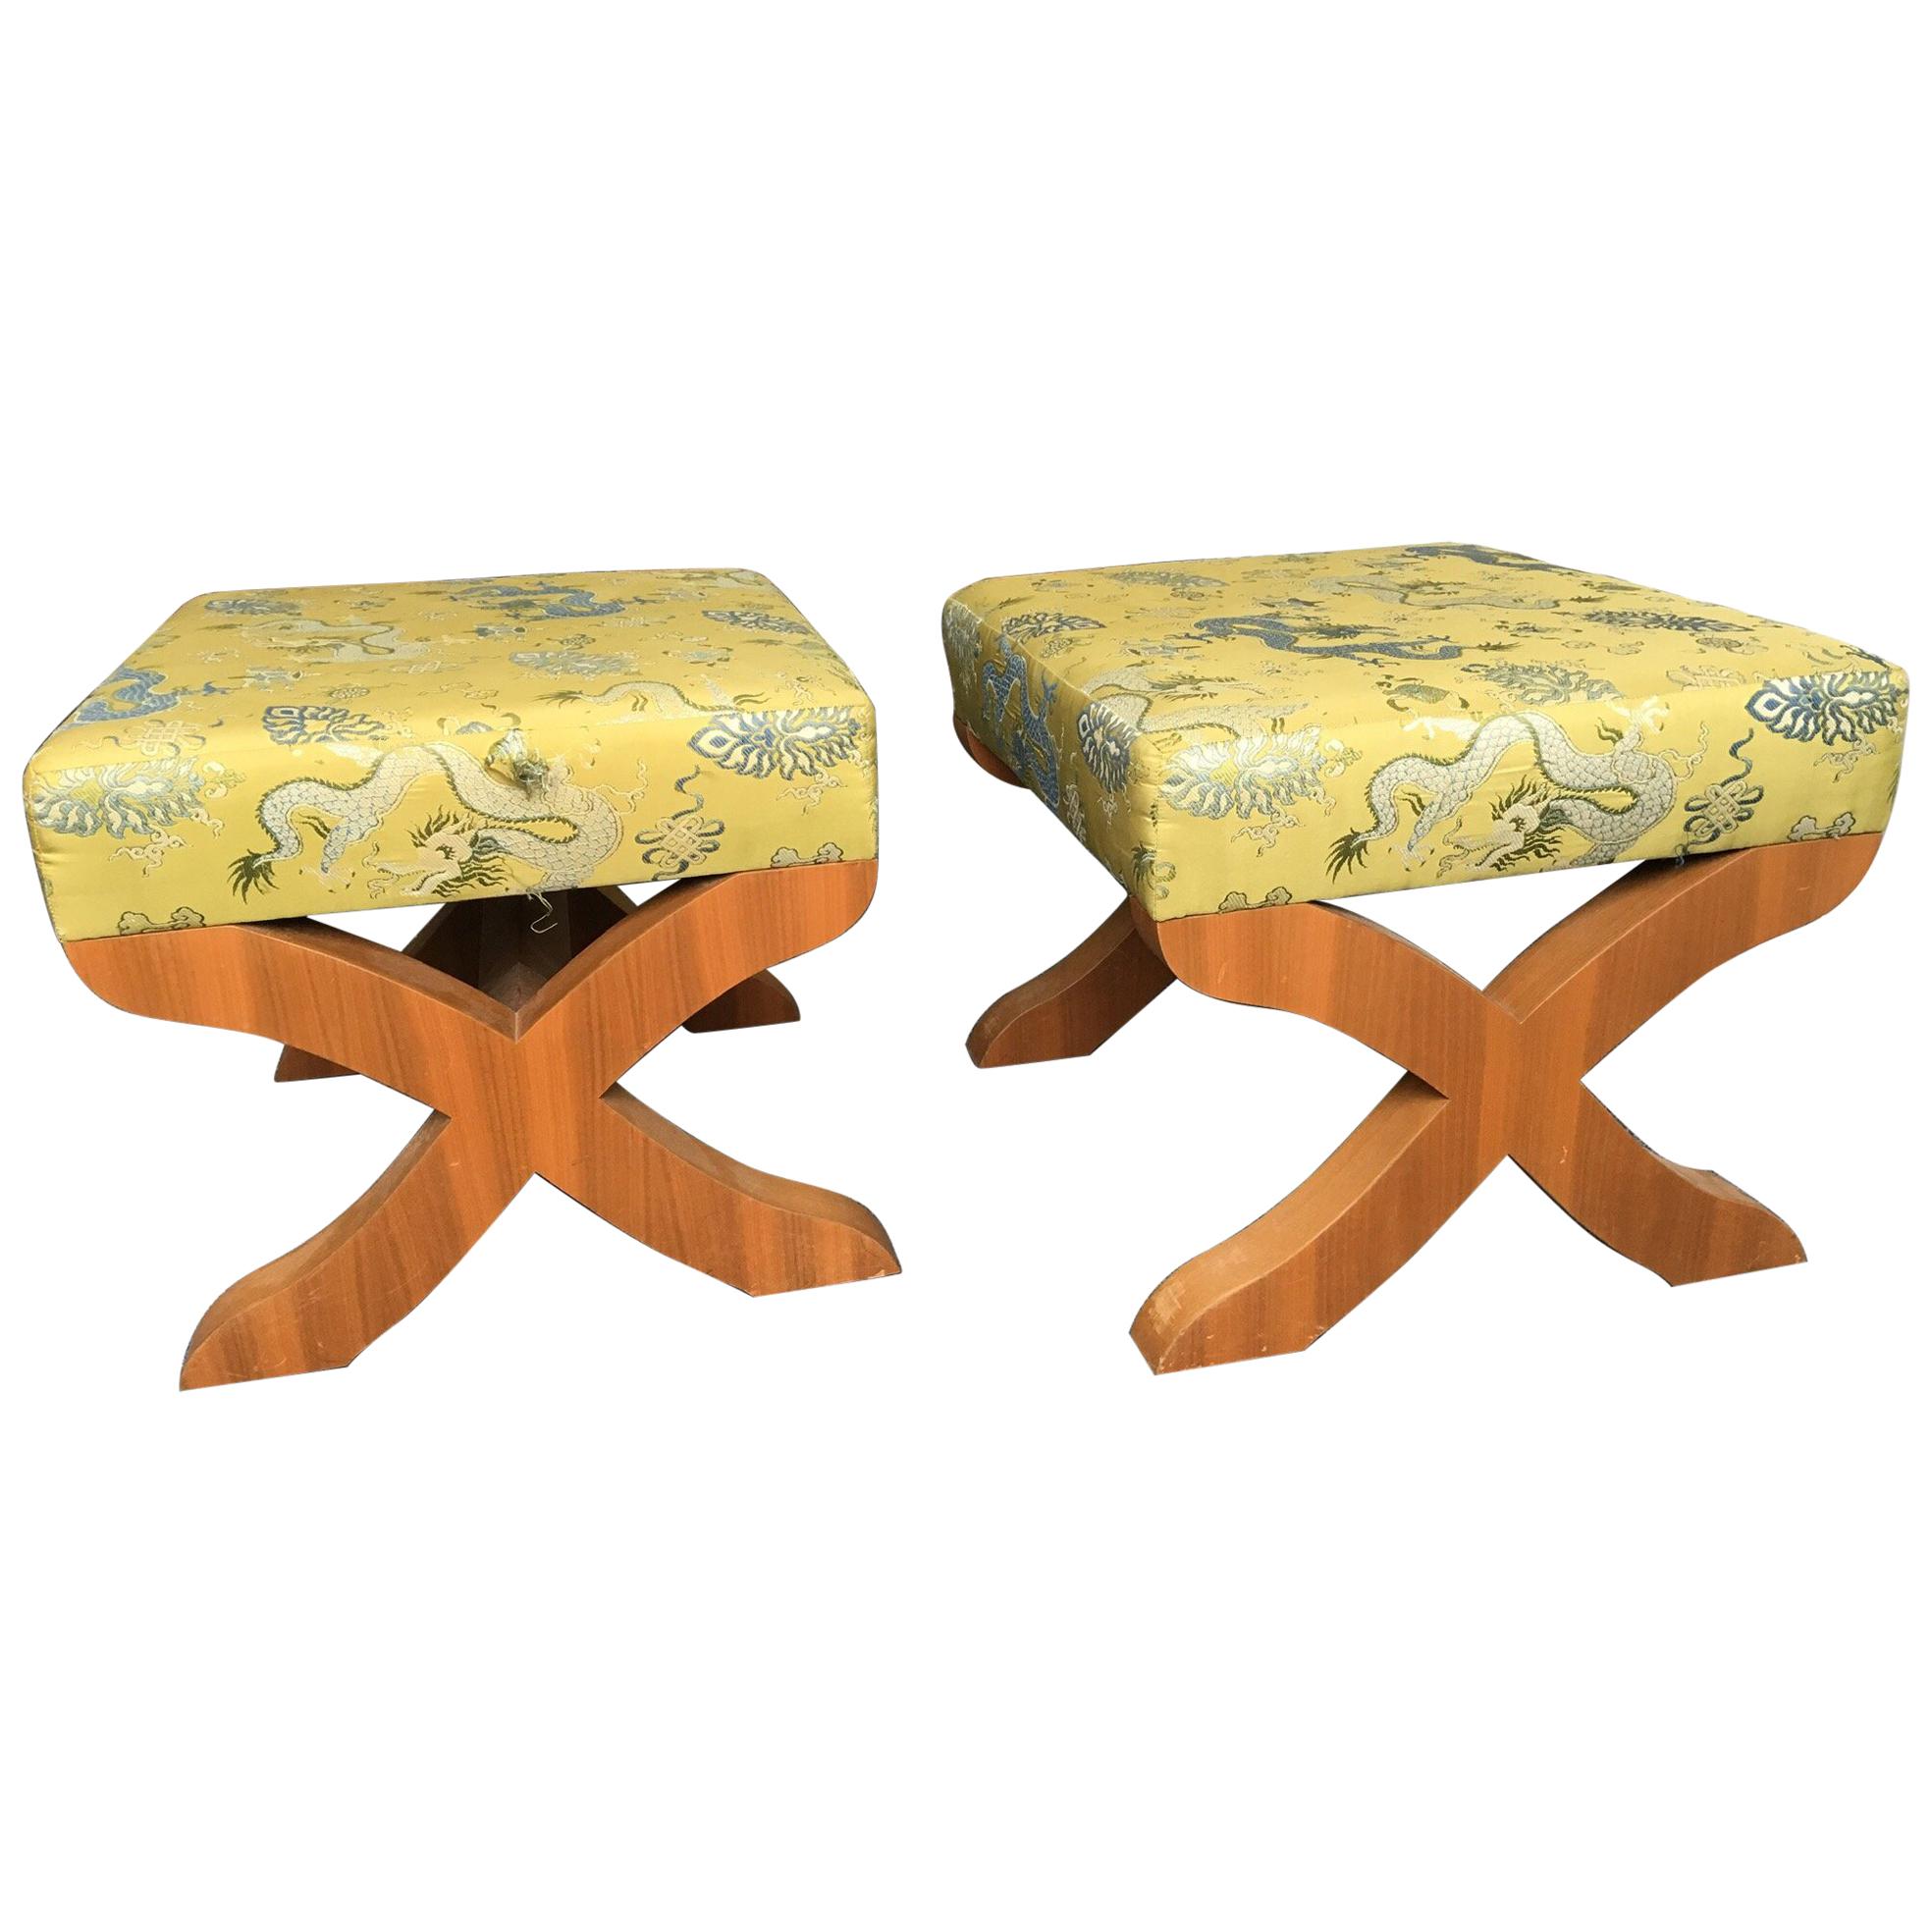 Pair of X-Base Stools in Silk Embroidered Fabric